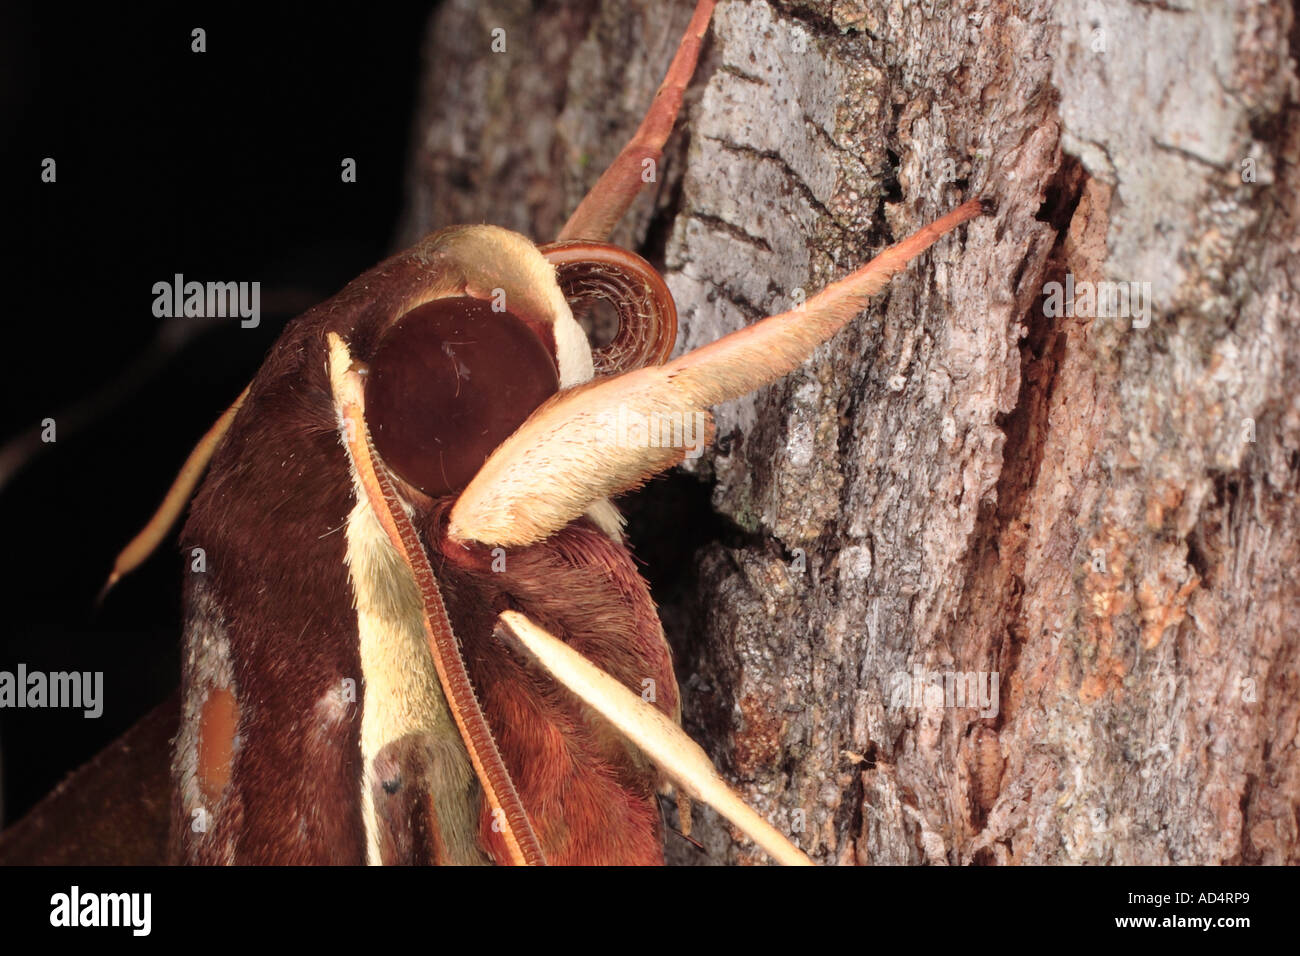 Hawkmoth Face showing the eye antennae and proboscis Stock Photo